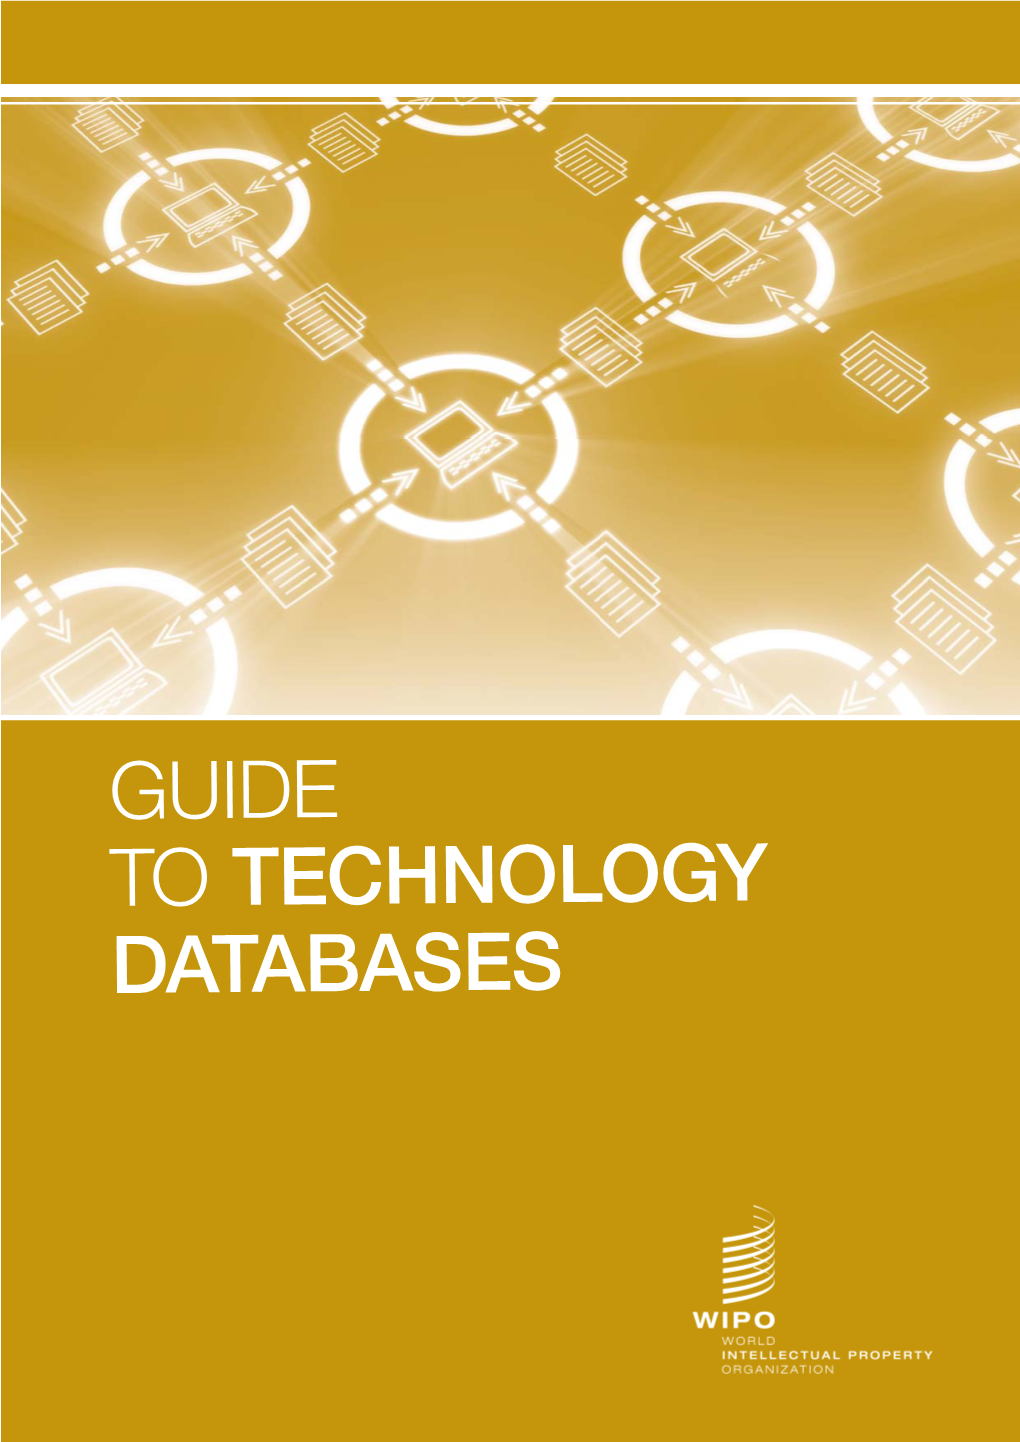 Guide to Technology Databases